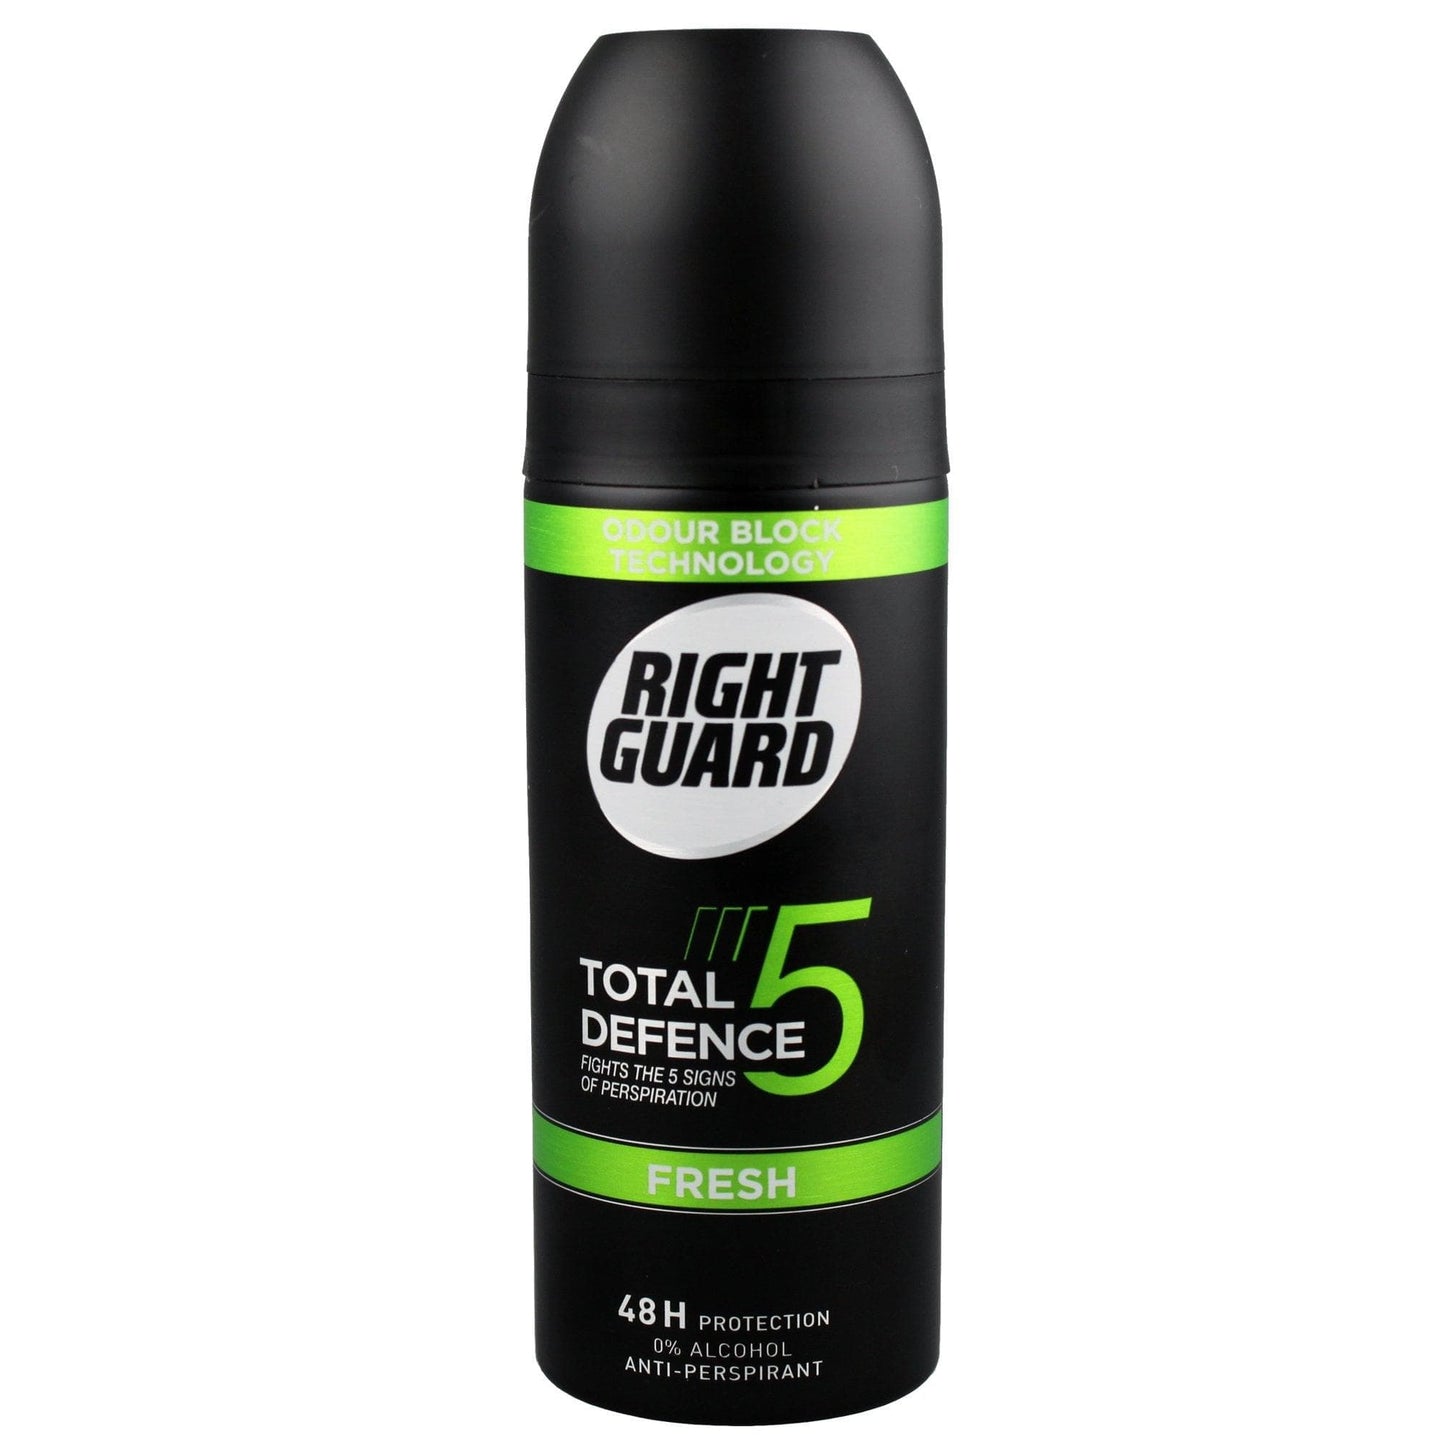 Right Guard Total Defence 5 Fresh 48hr 150ml - welzo